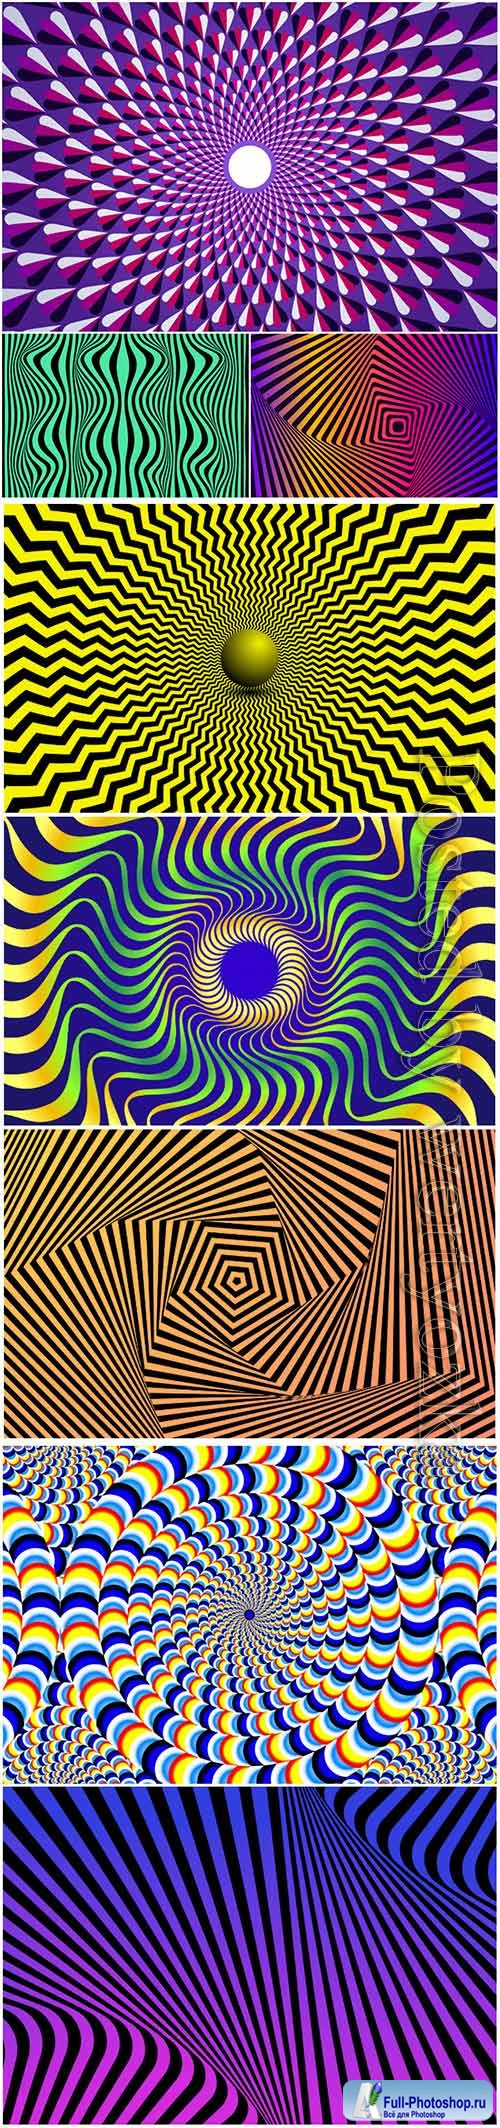 Psychedelic optical illusion vector background # 3